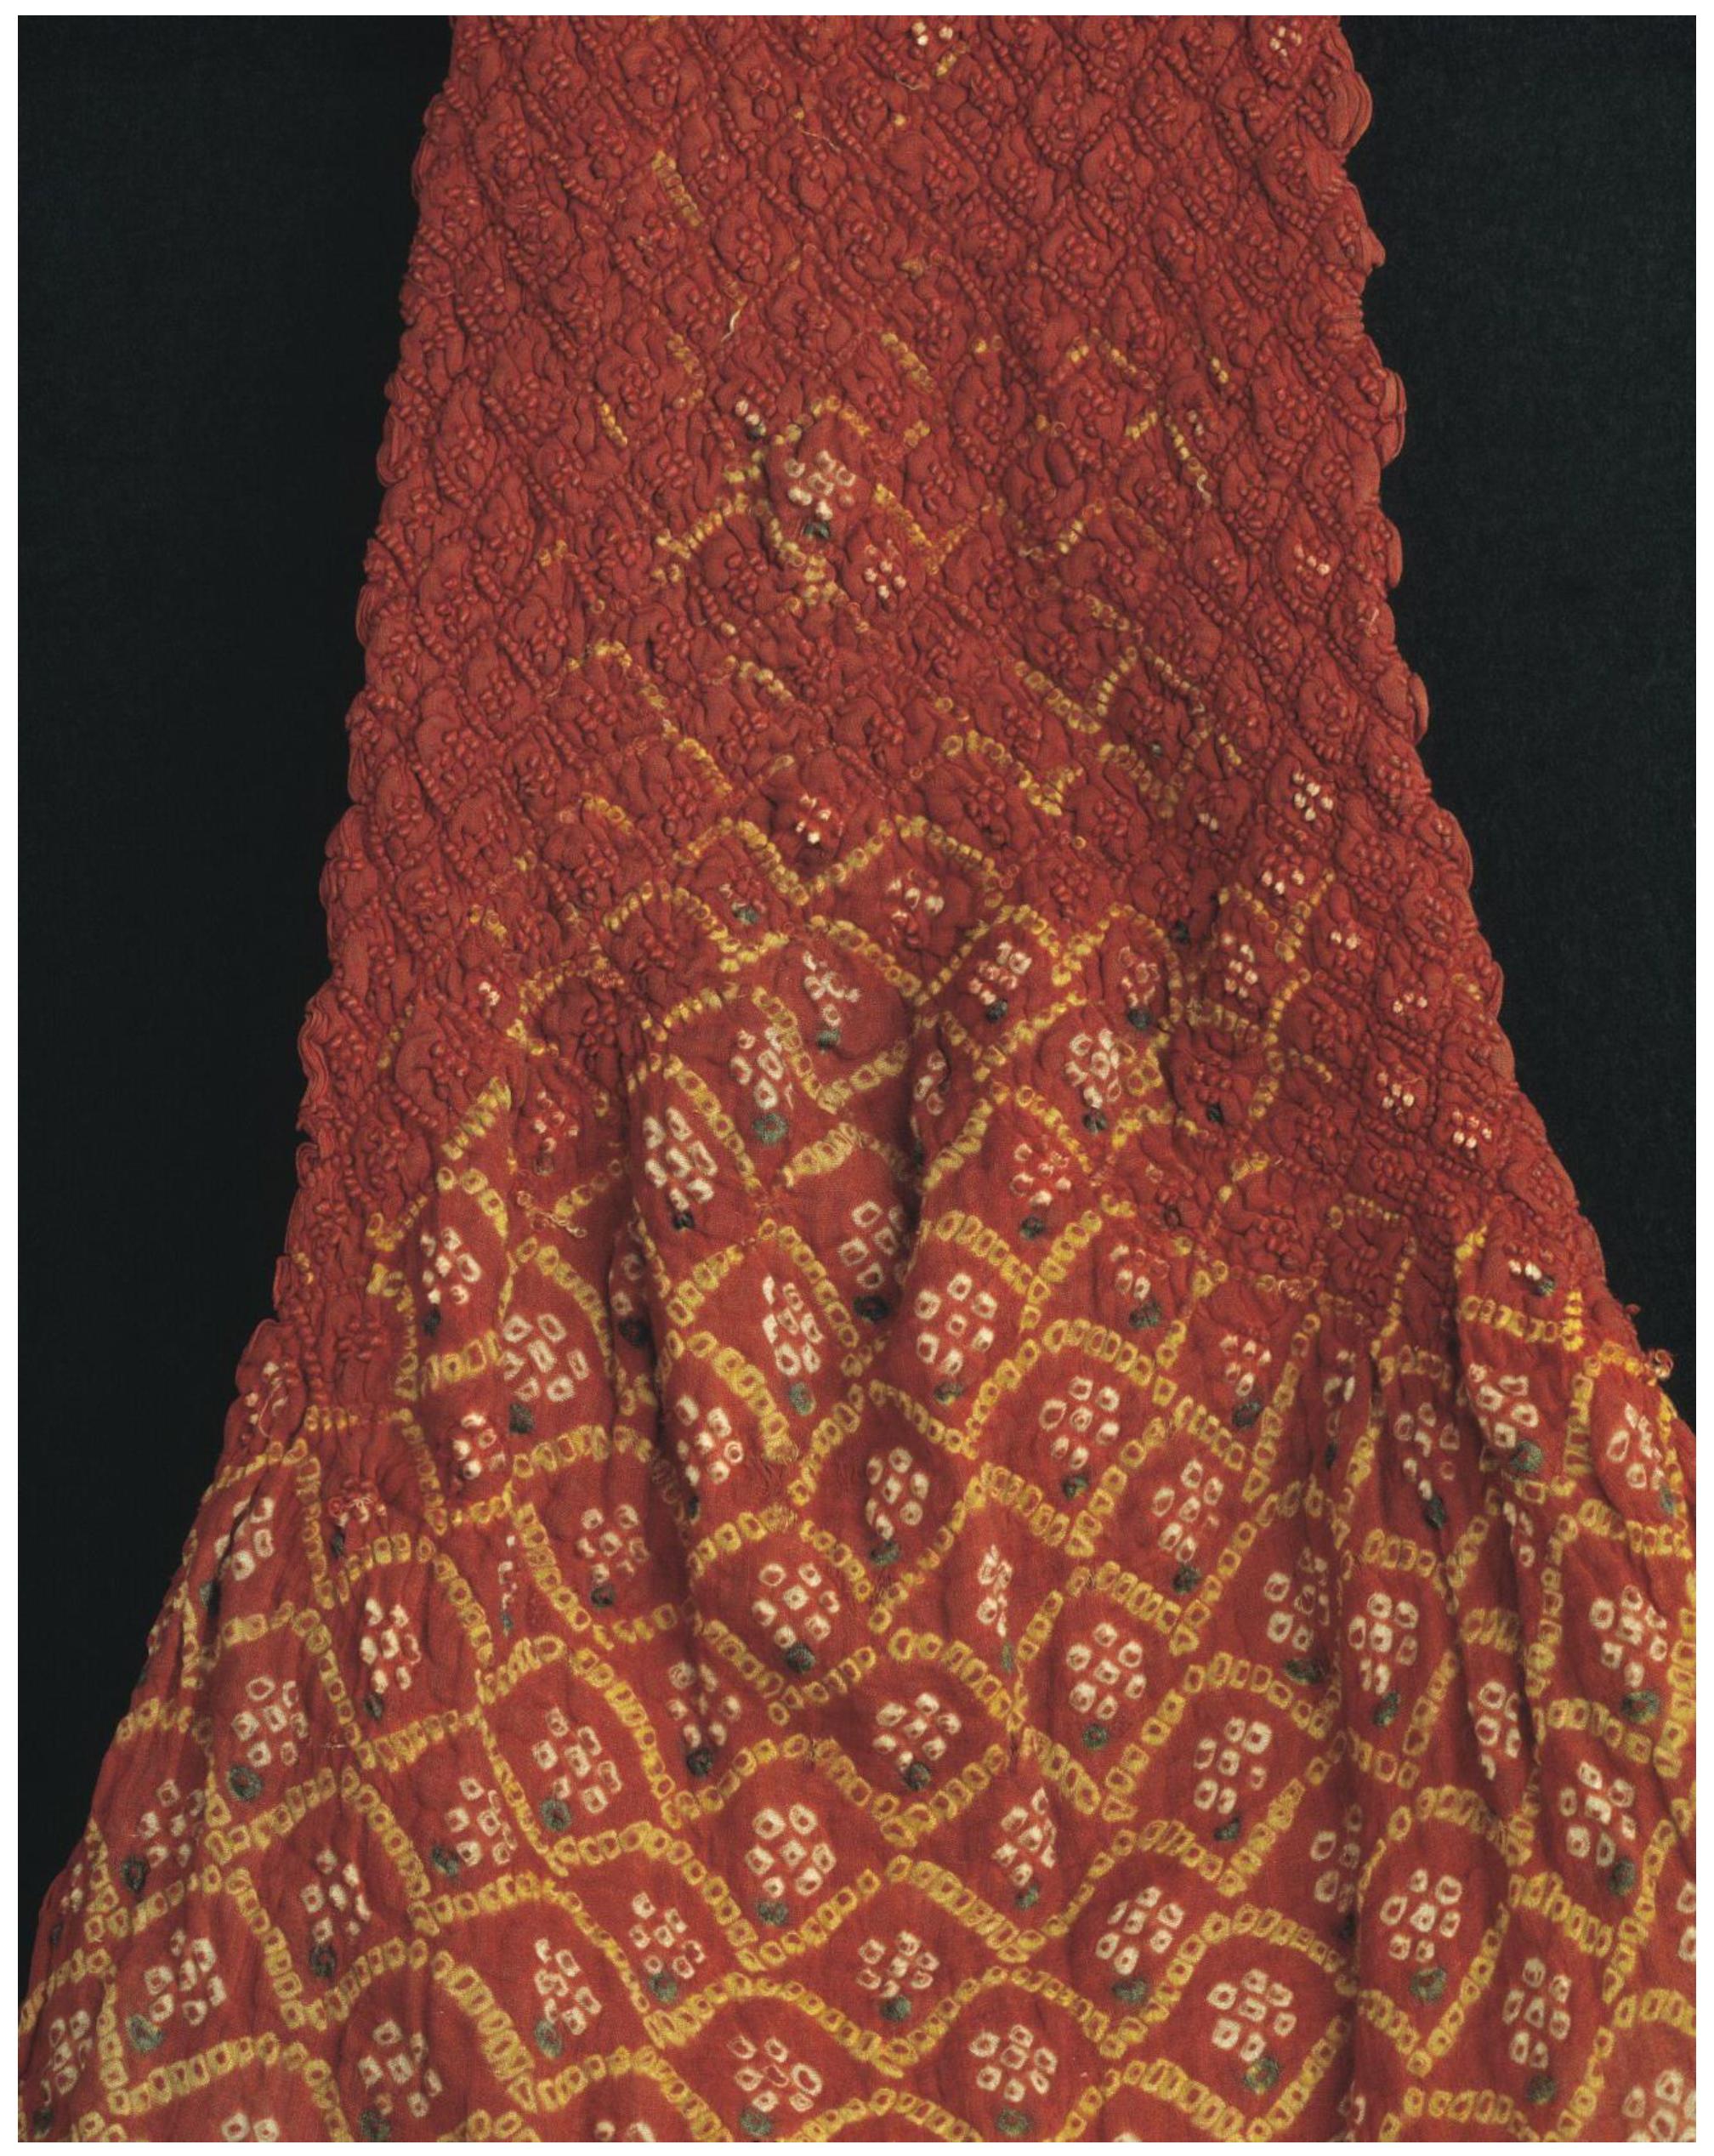 Religions | Free Full-Text of and The and Early South Dyeing Textile Art the Modern Poetry Fleeting Medieval Springtime: in Asia | Colors